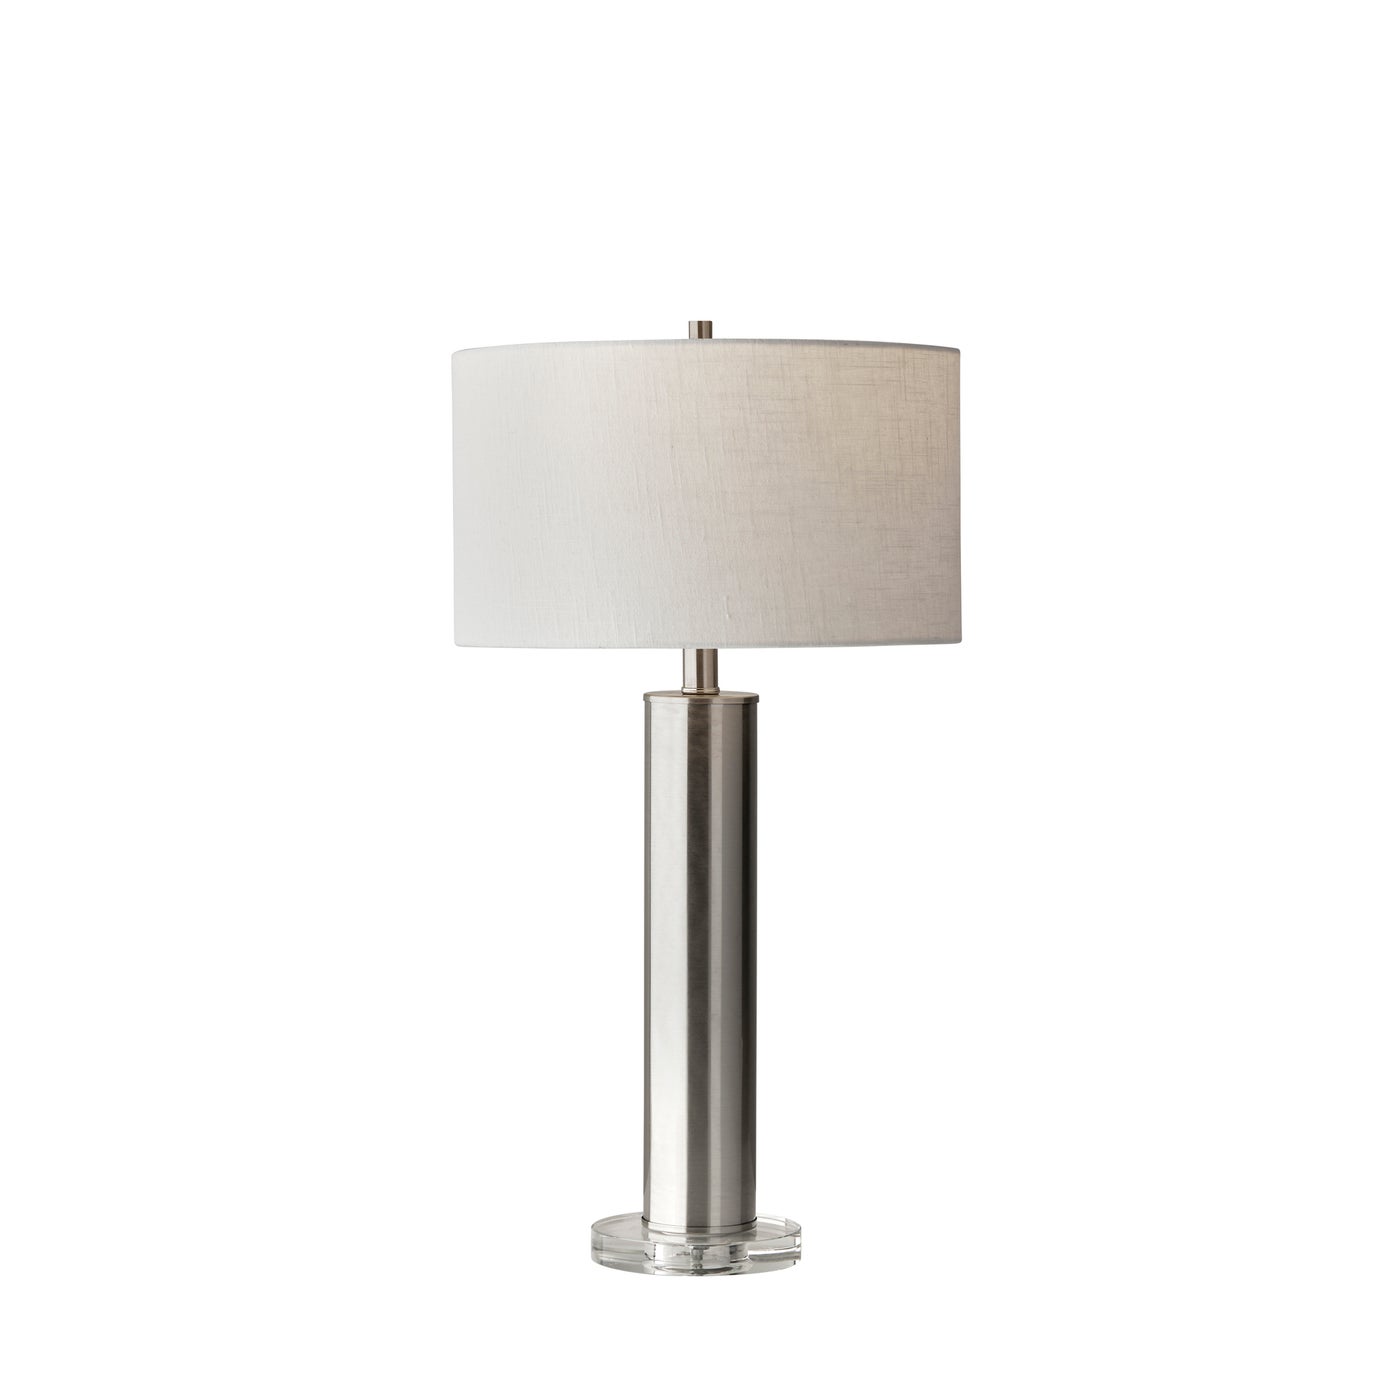 Adesso Home - 1560-22 - Table Lamp - Ezra - Brushed Steel